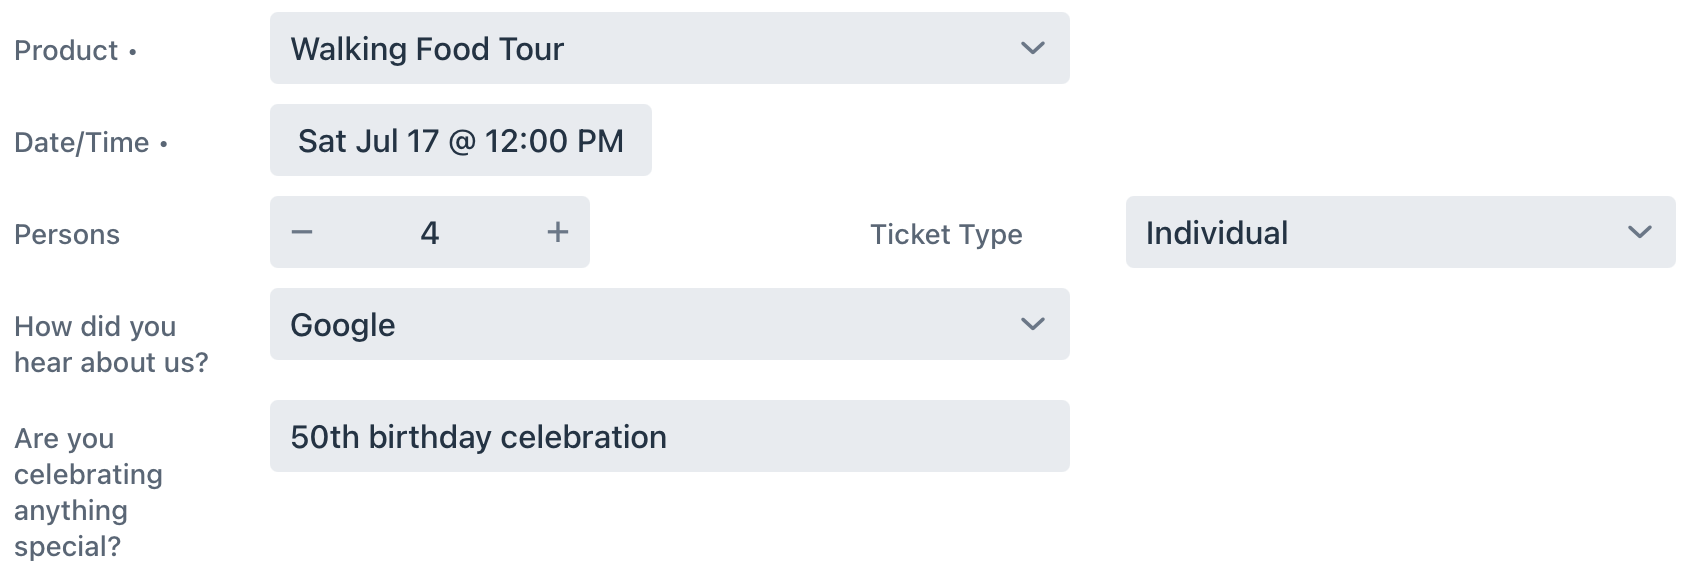 New_Booking_Form_-_Ticket_setup.png